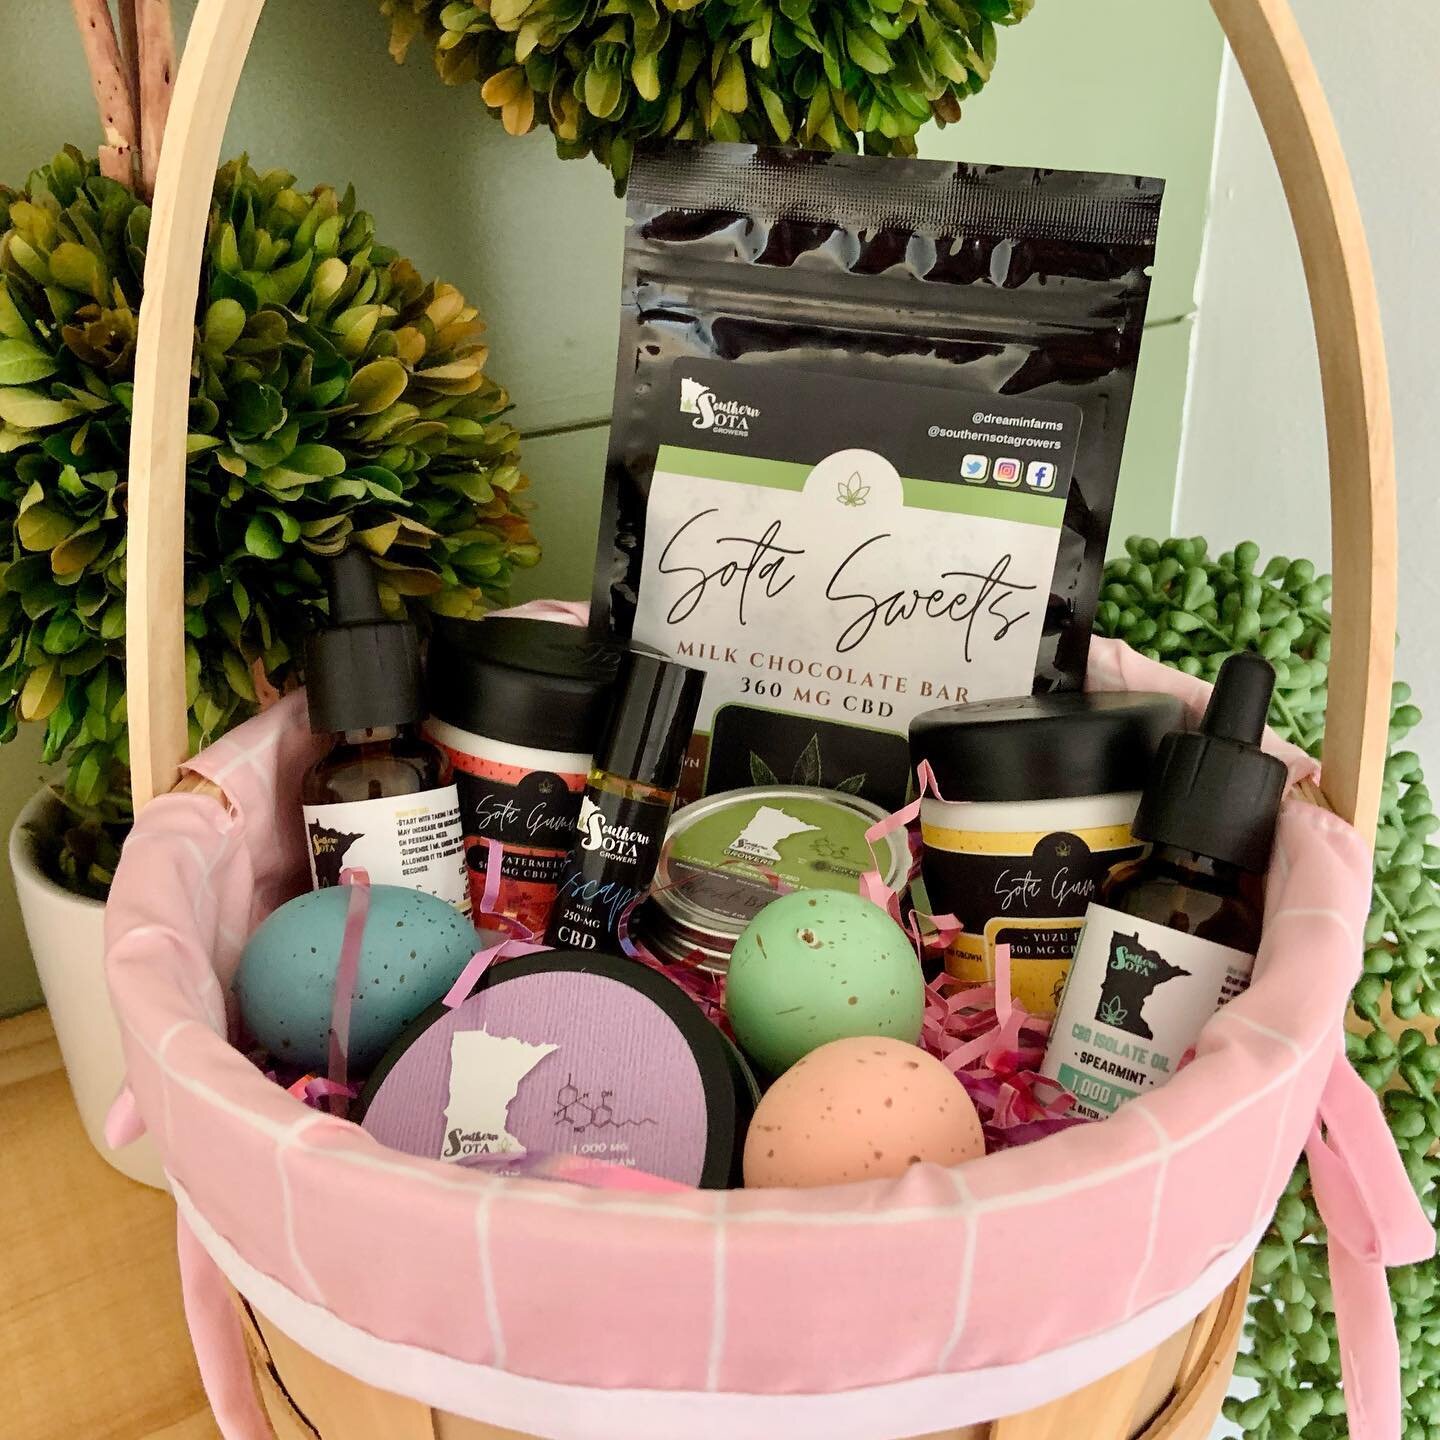 We&rsquo;re EGG-CITED to offer 20% OFF all Easter weekend! 
💖🐰 🥚🐣 🐇 💖
Enter Promo Code: HOP20 
📲~dreaminfarms.com
&bull;
20% OFF ends at midnight Sunday! 
#happyeaster 🐰💐💚
@dreaminfarms 🌱